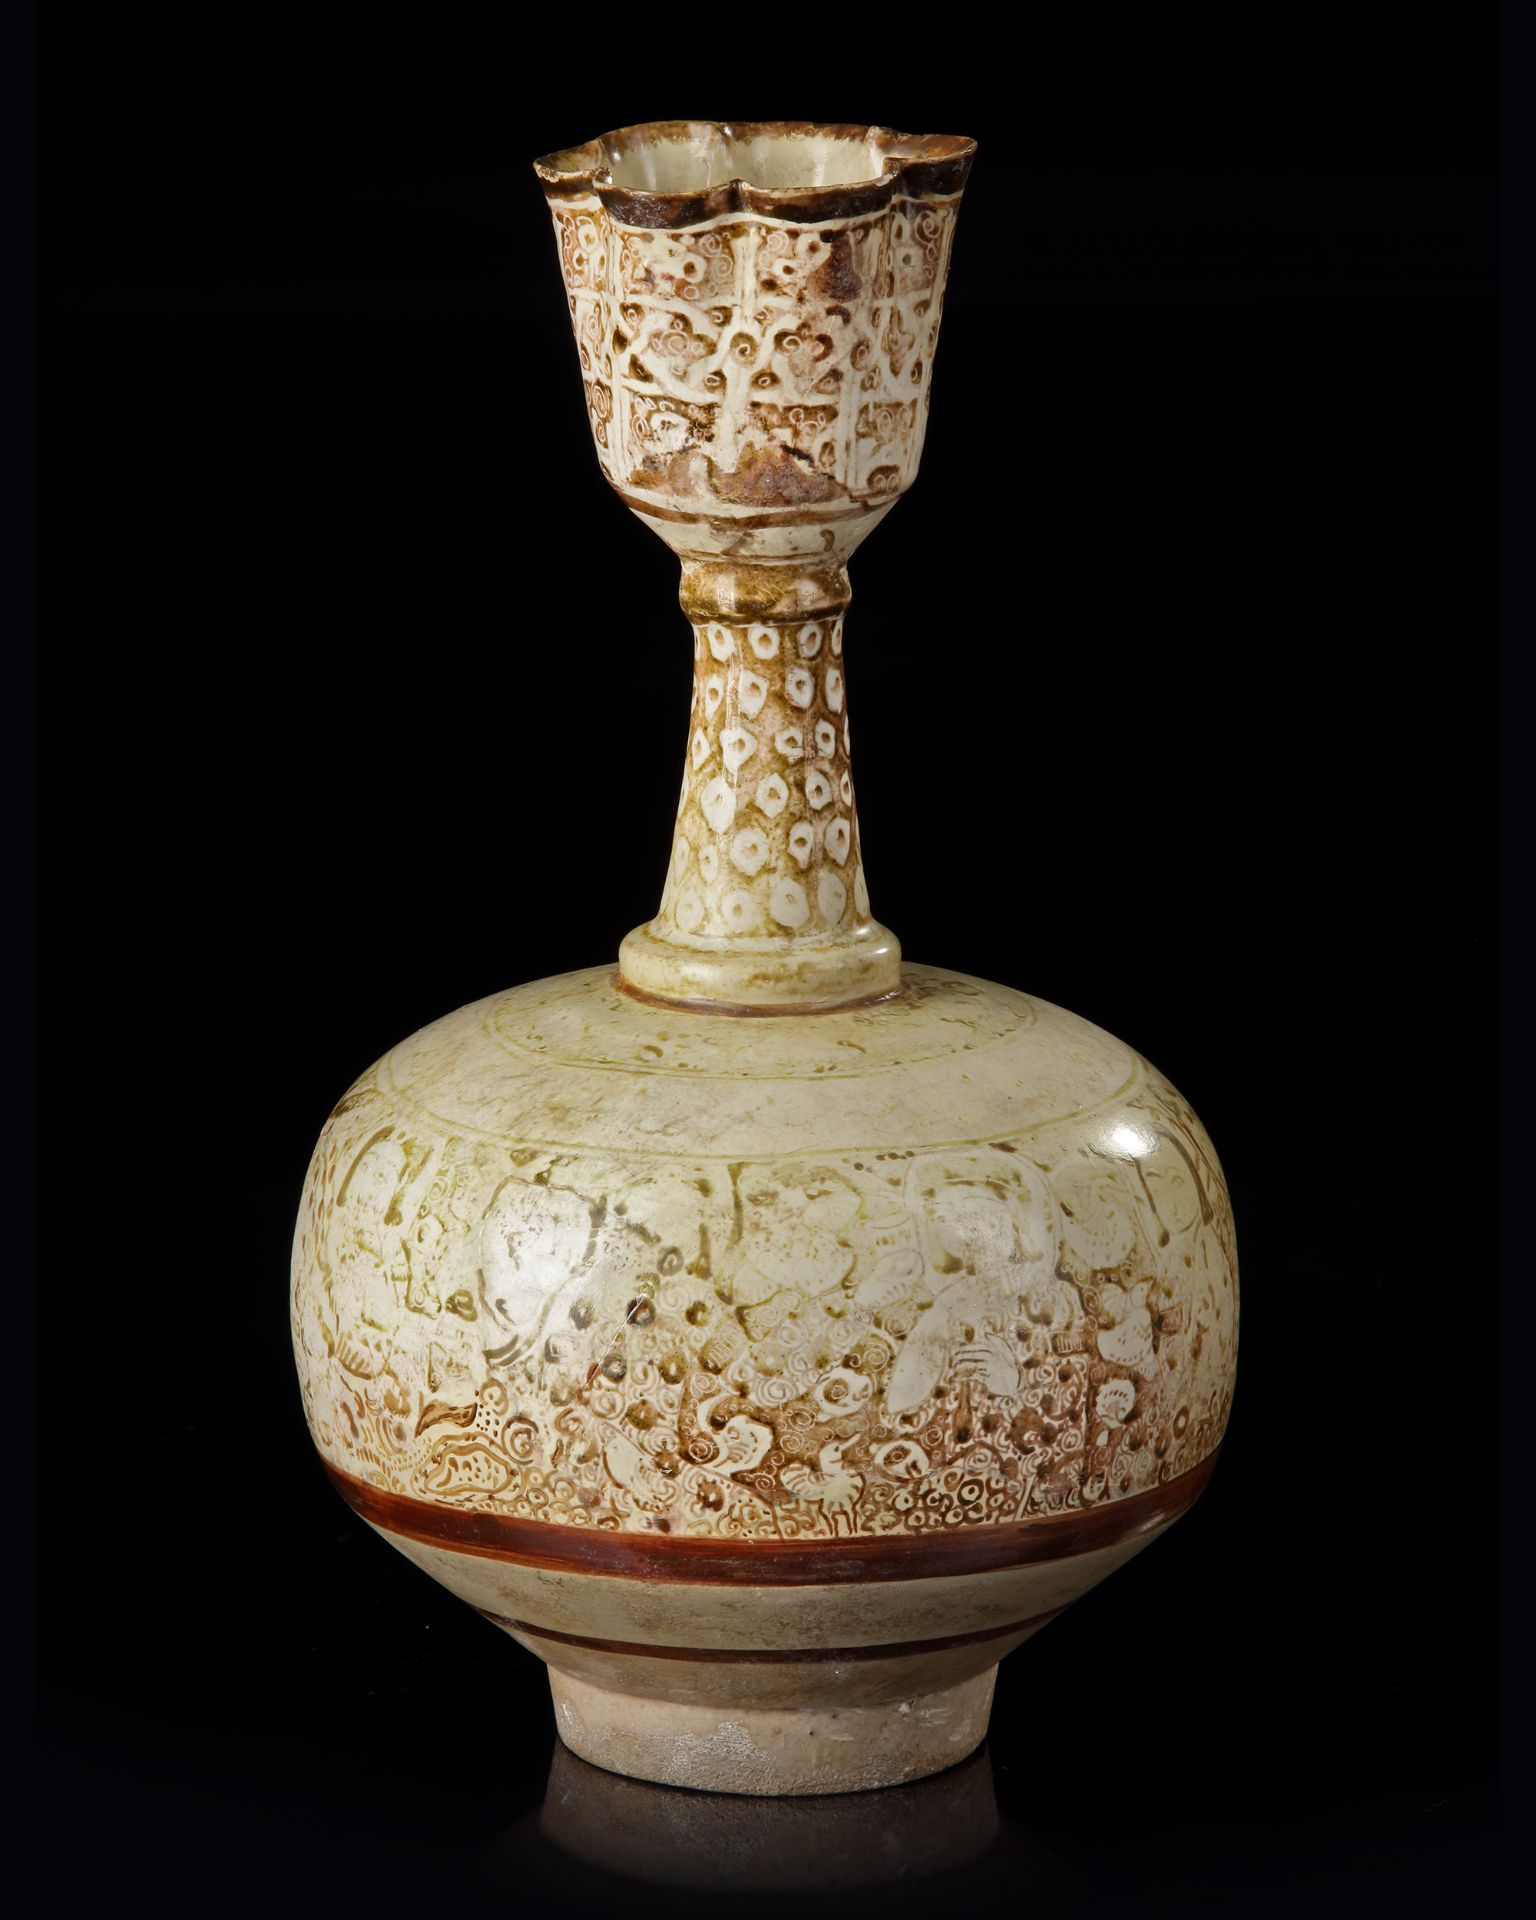 A KASHAN LUSTRE POTTERY BOTTLE VASE, PERSIA, EARLY 13TH CENTURY - Image 4 of 10